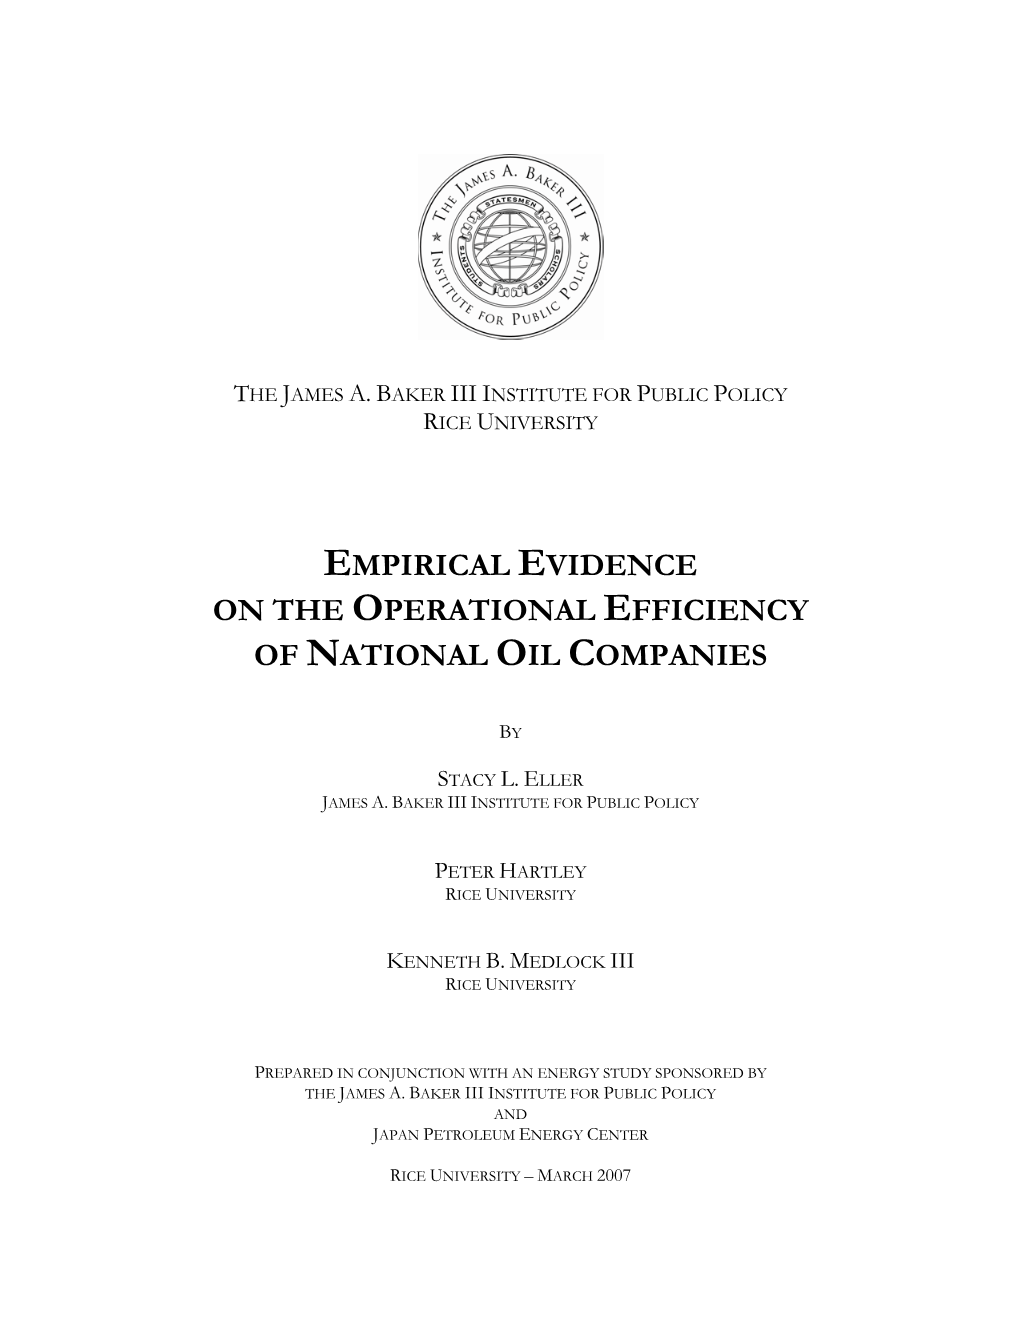 Empirical Evidence on the Operational Efficiency of National Oil Companies